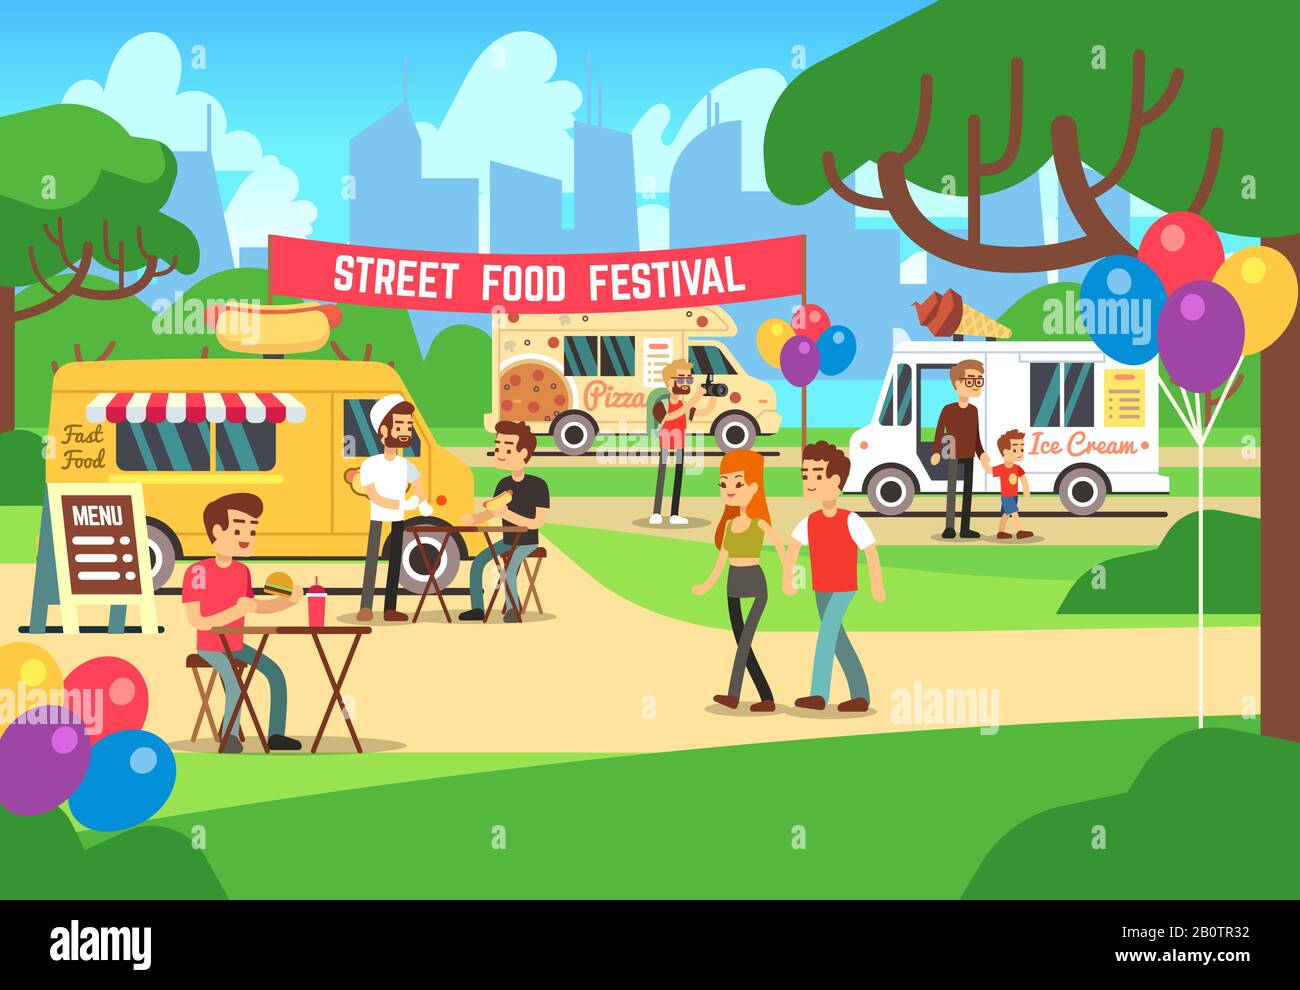 Cartoon street food festival with people and trucks vector background. Street food festival and market illustration Stock Vector